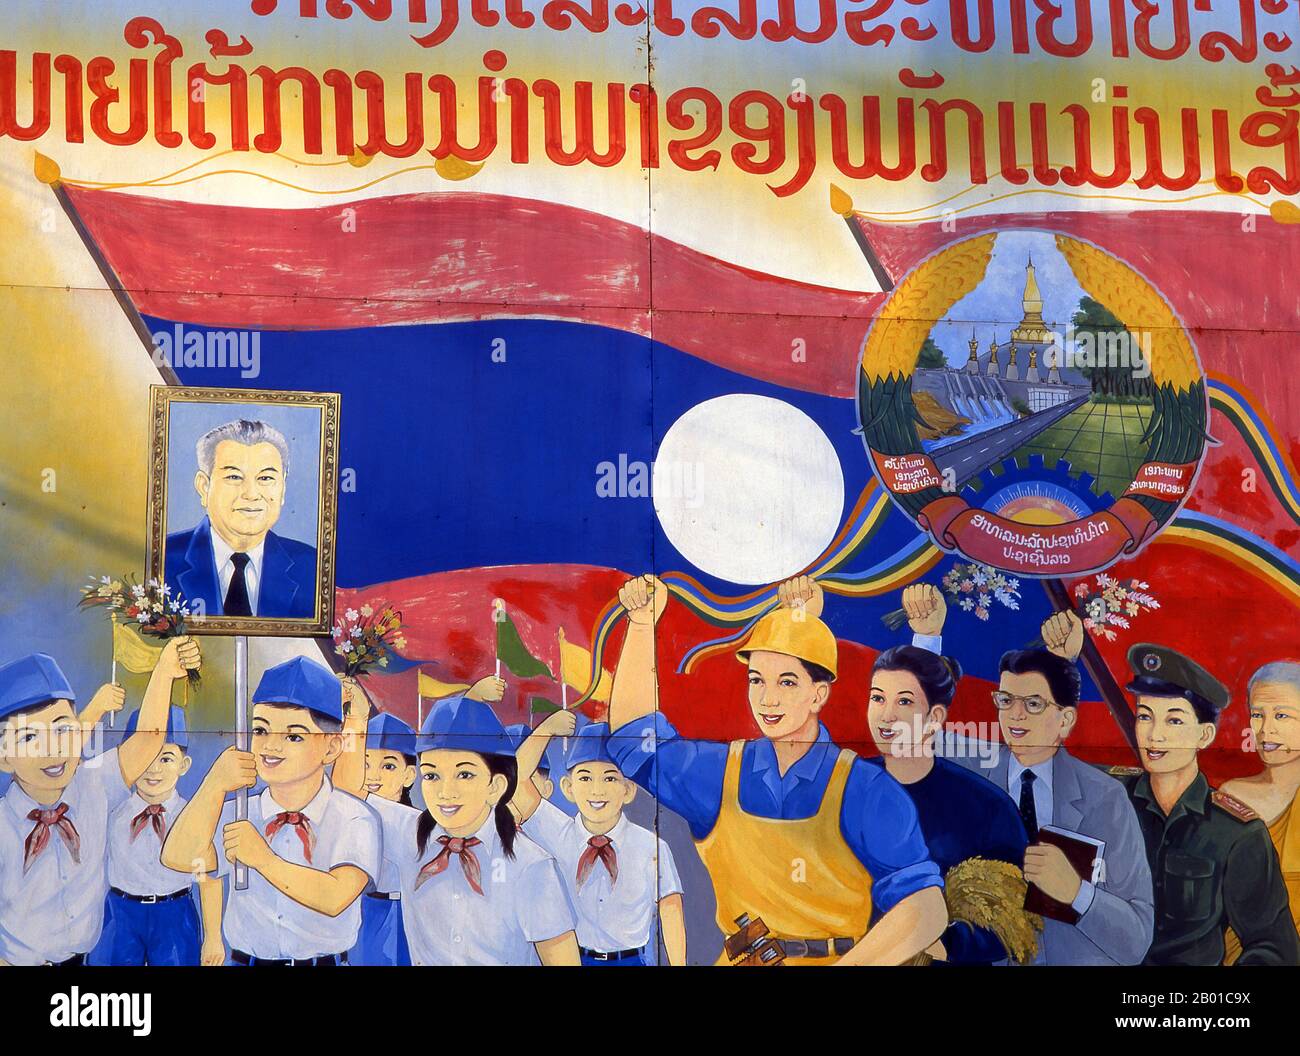 Laos: Children carry an image of Kaysone Phomvihane, President of Laos from 1991 until his death in 1992, Revolutionary Socialist realist-style political poster on the streets of Vientiane.  Kaysone Phomvihane (13 December 1920 - 21 November 1992) was the leader of the Lao People's Revolutionary Party from 1955. He served as the first Prime Minister of the Lao People's Democratic Republic from 1975 to 1991 and then as President from 1991 until his death in 1992. Stock Photo